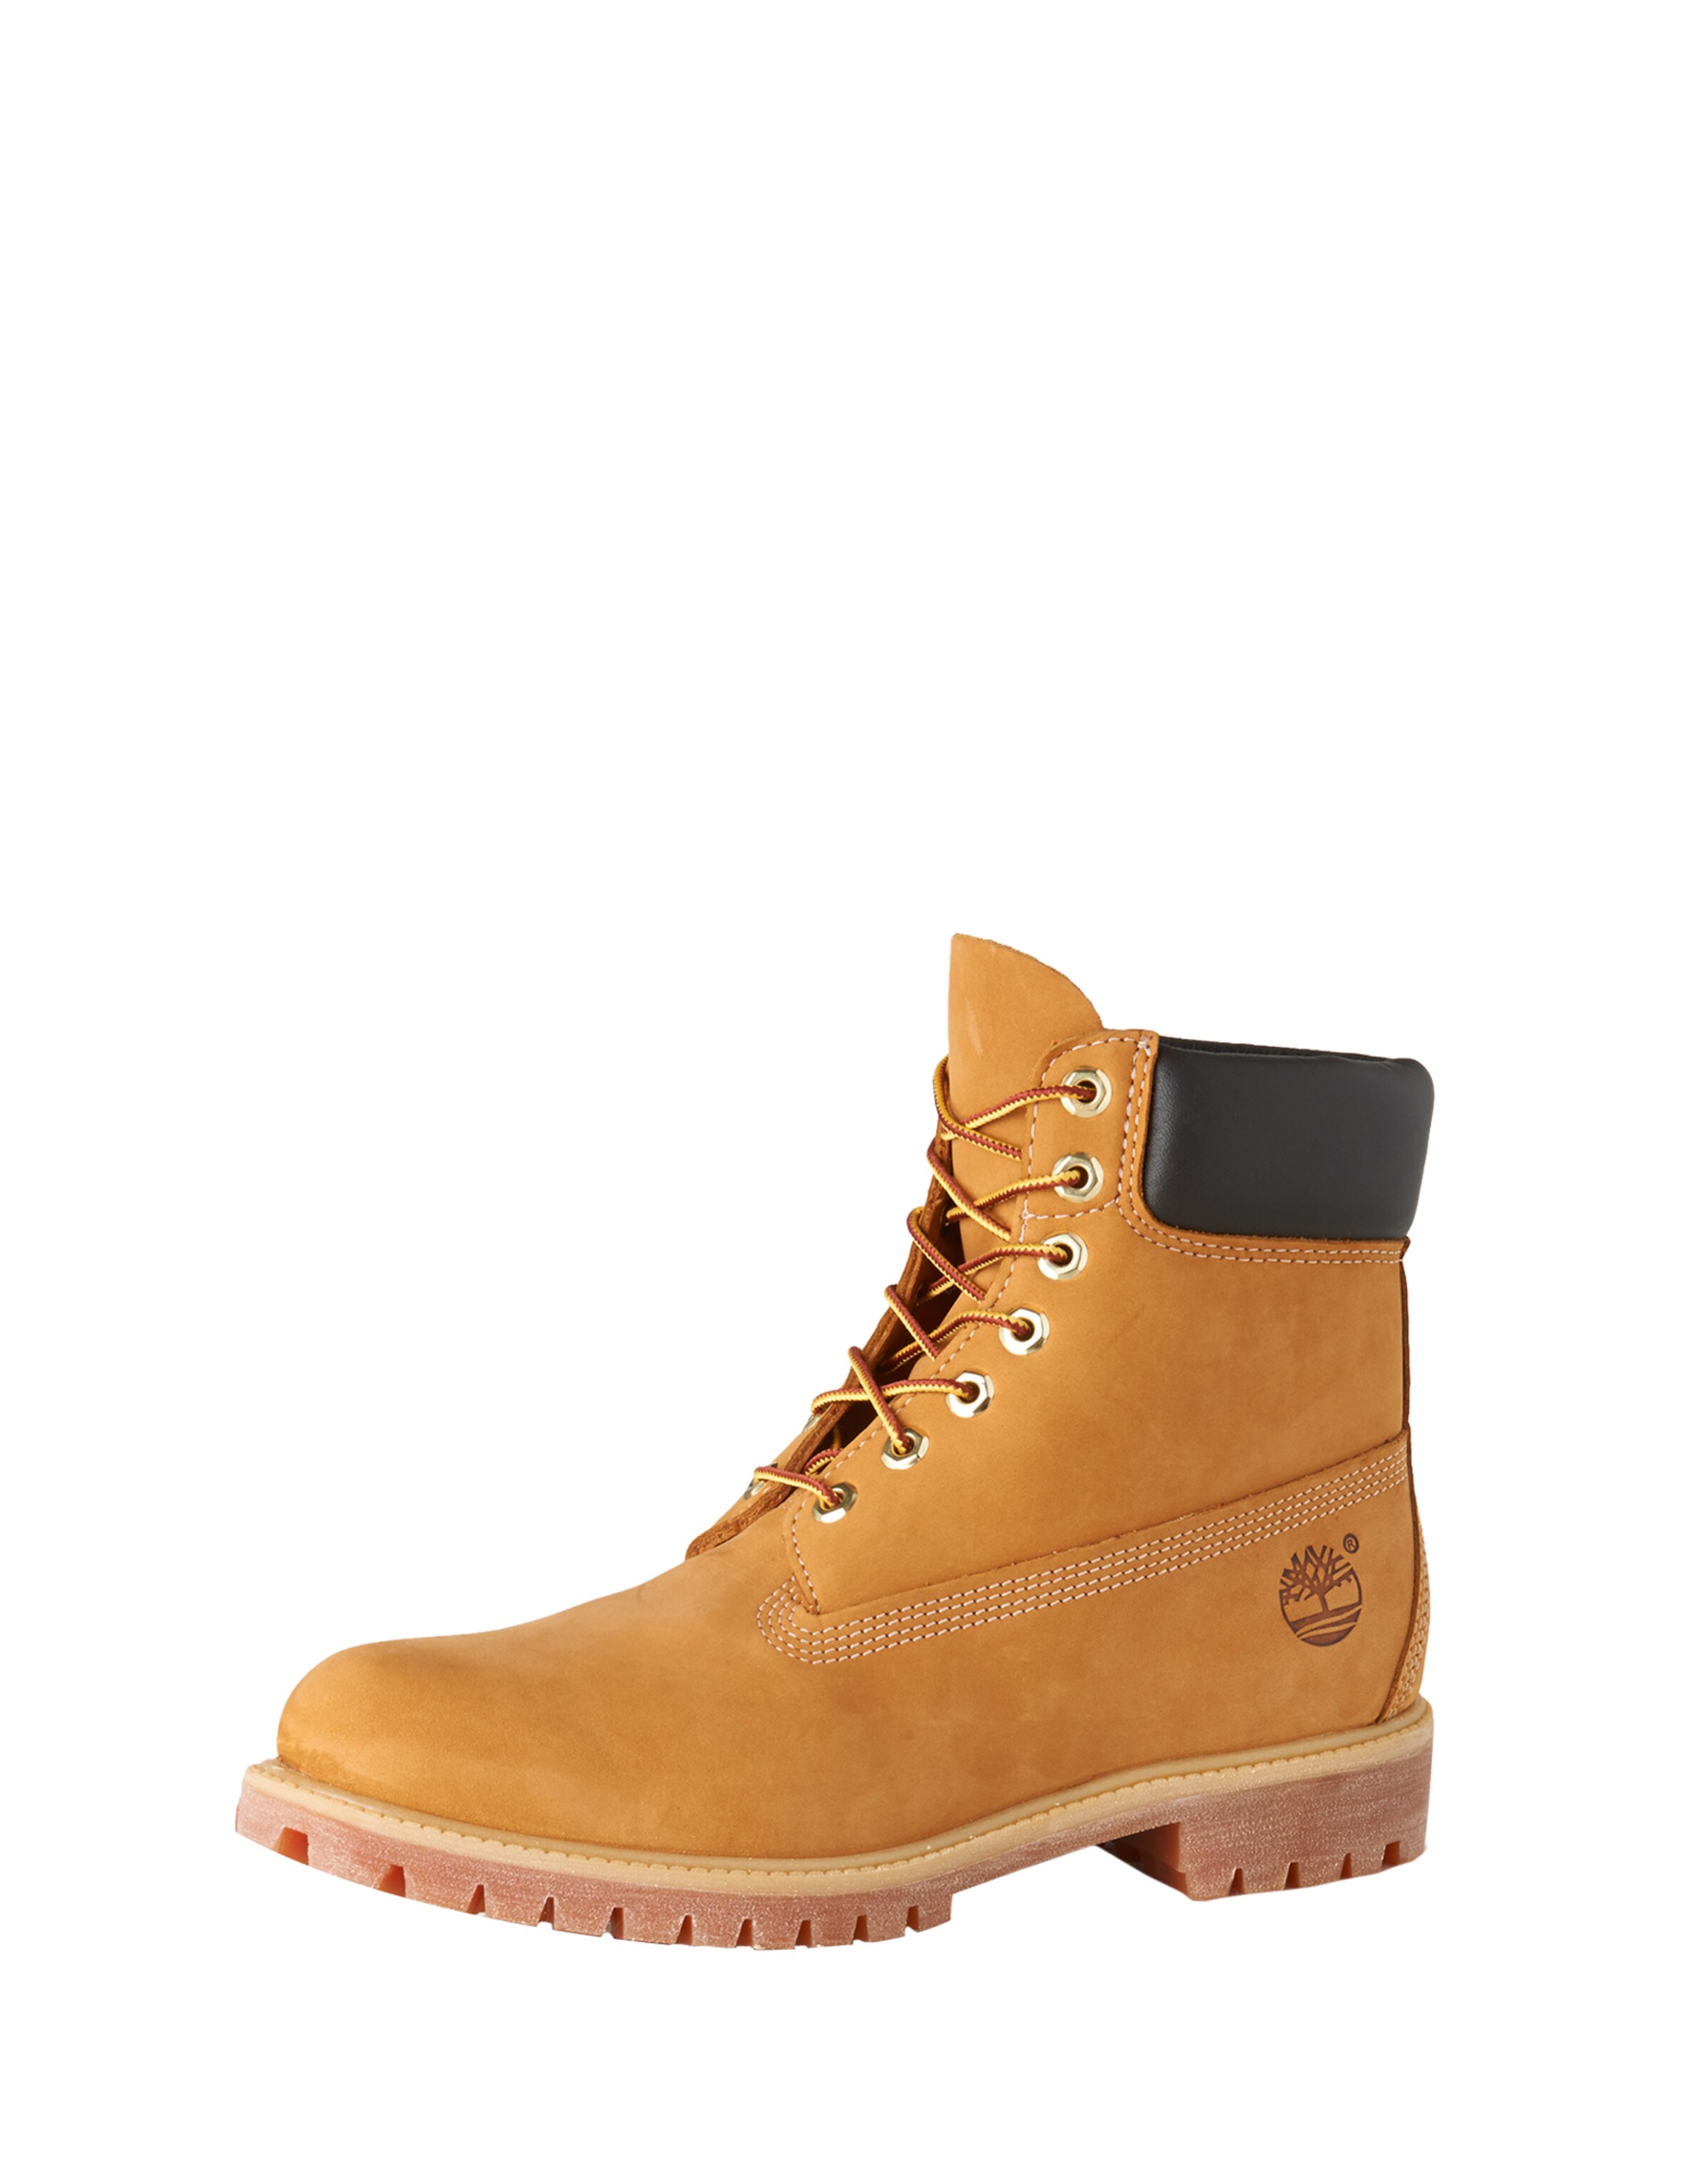 Men Boots | TIMBERLAND Lace-Up Boots in Curry - AV56480